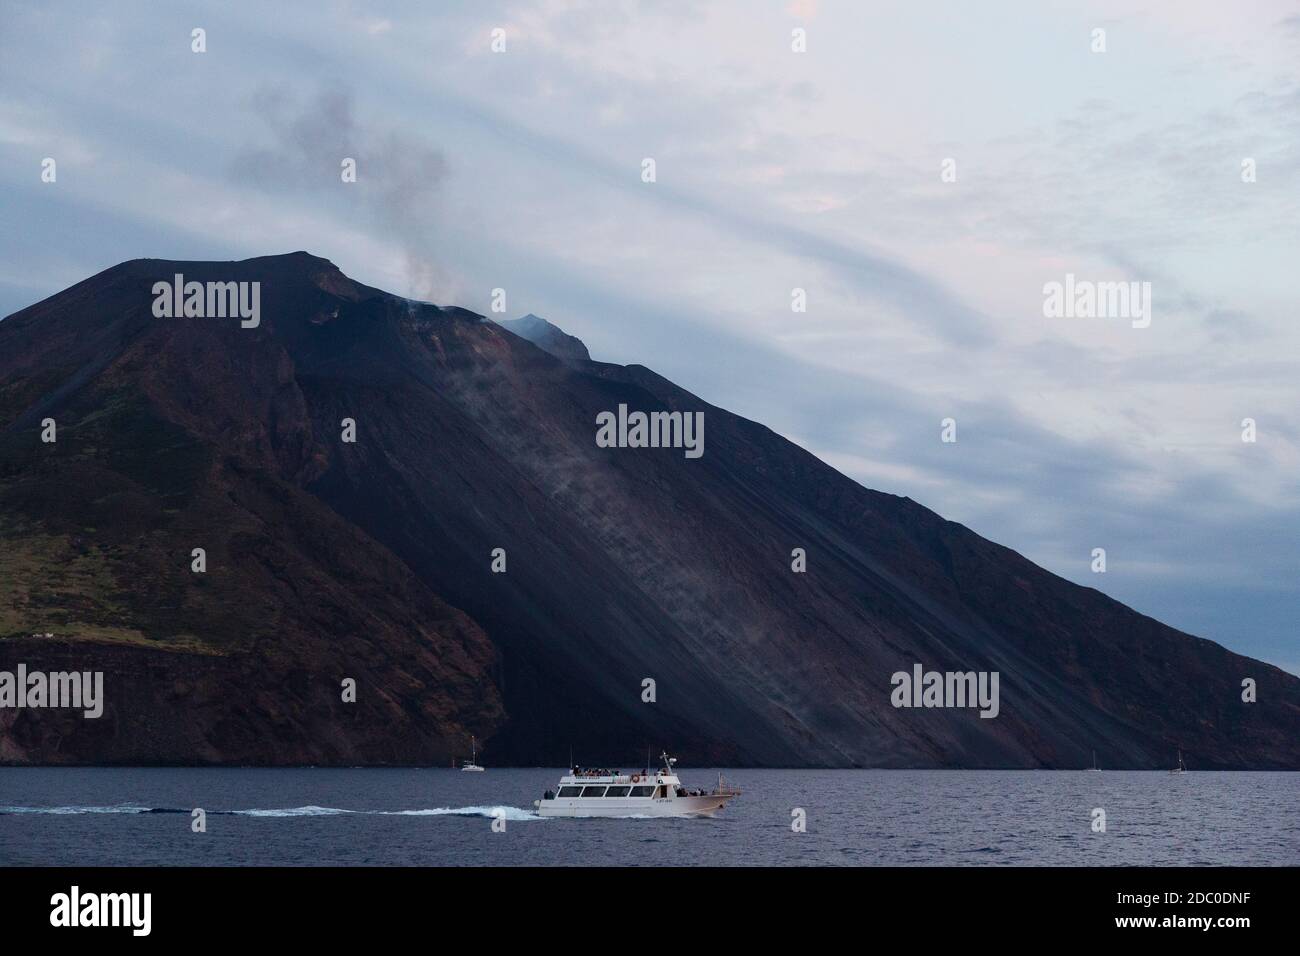 Sicily, Italy. A tourist boat passes in front of the volcanic island of Stromboli as the active volcano emits a dark plume of smoke and ash. Stock Photo